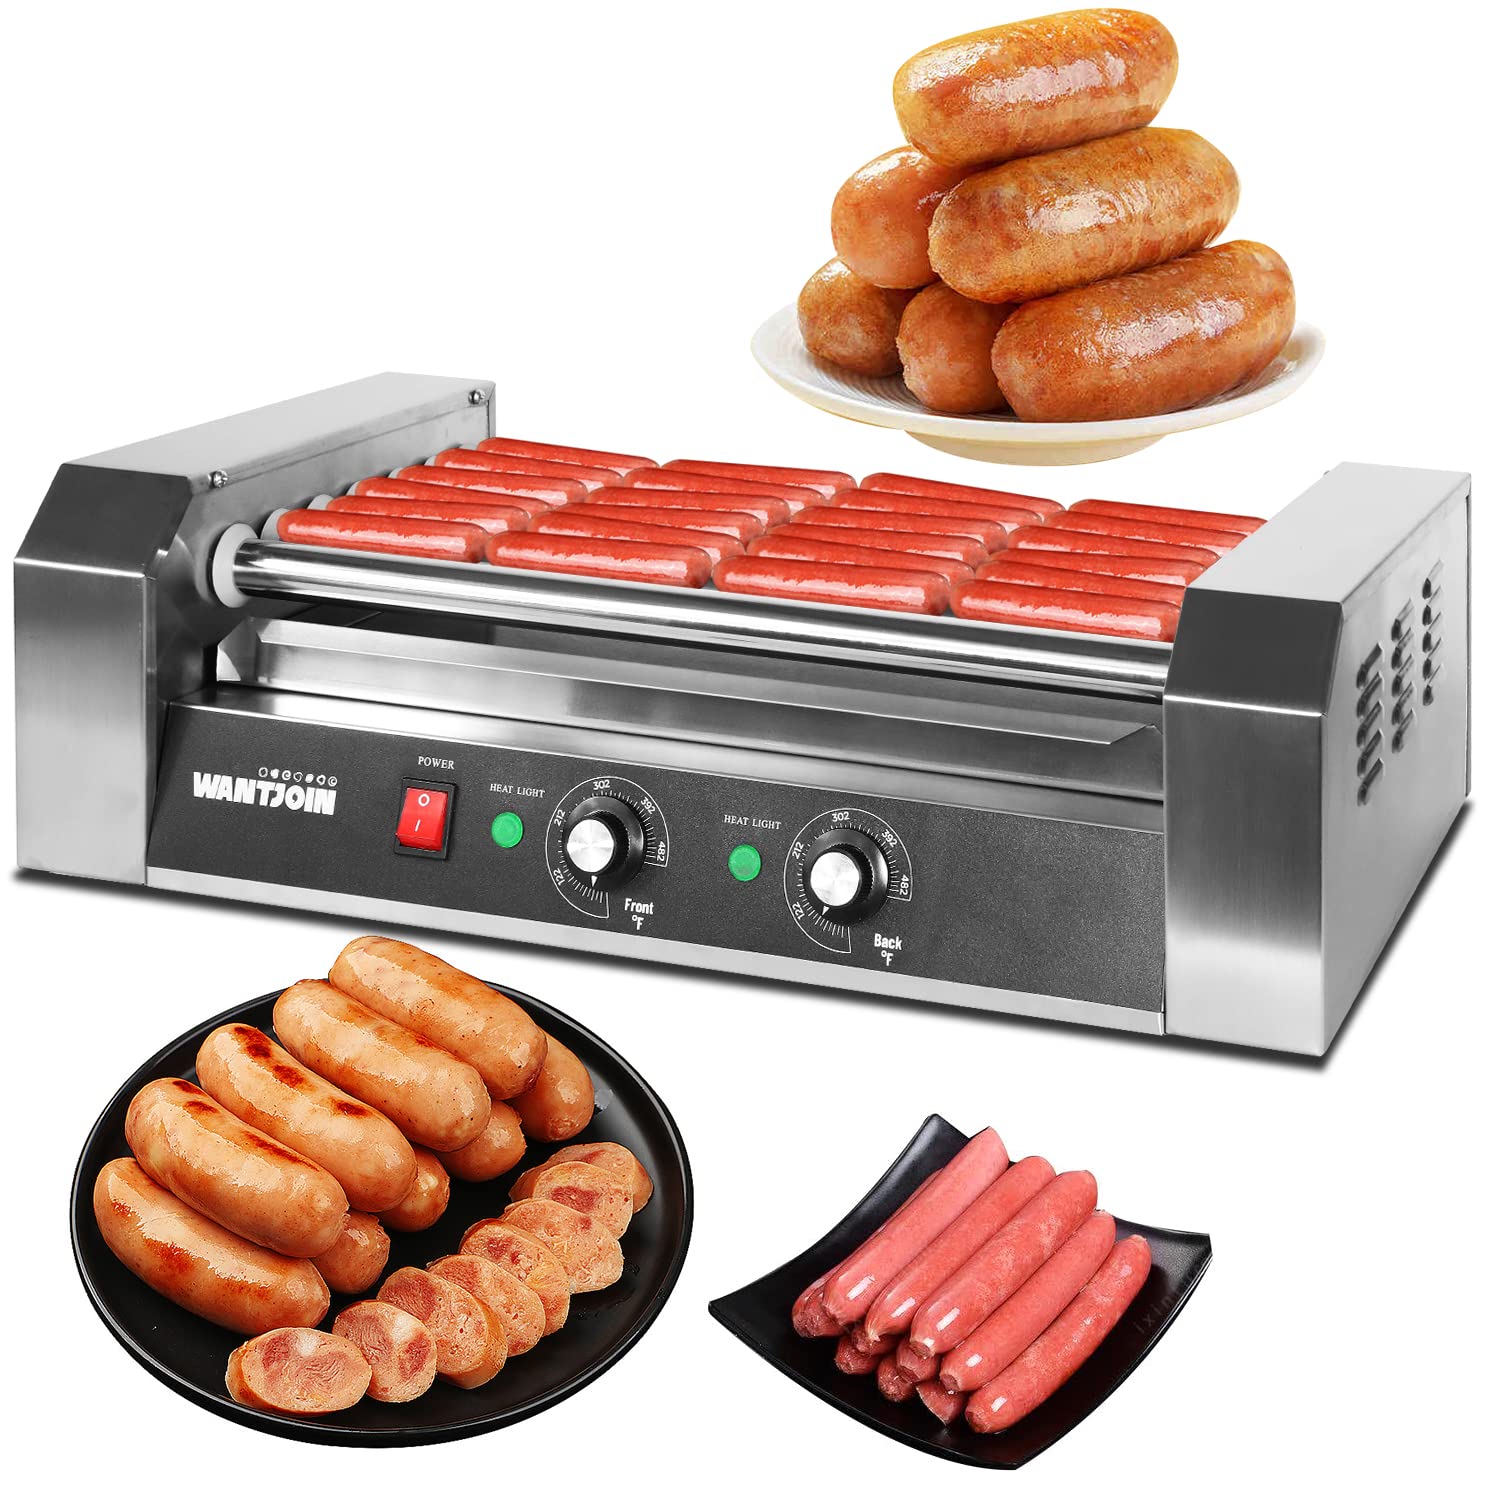 WantJoin Hot Dog grill Machine, commercial Electric Hot Dog roller Sausage Machine Hot-dog 7 Roller grill cooker Machine (silver